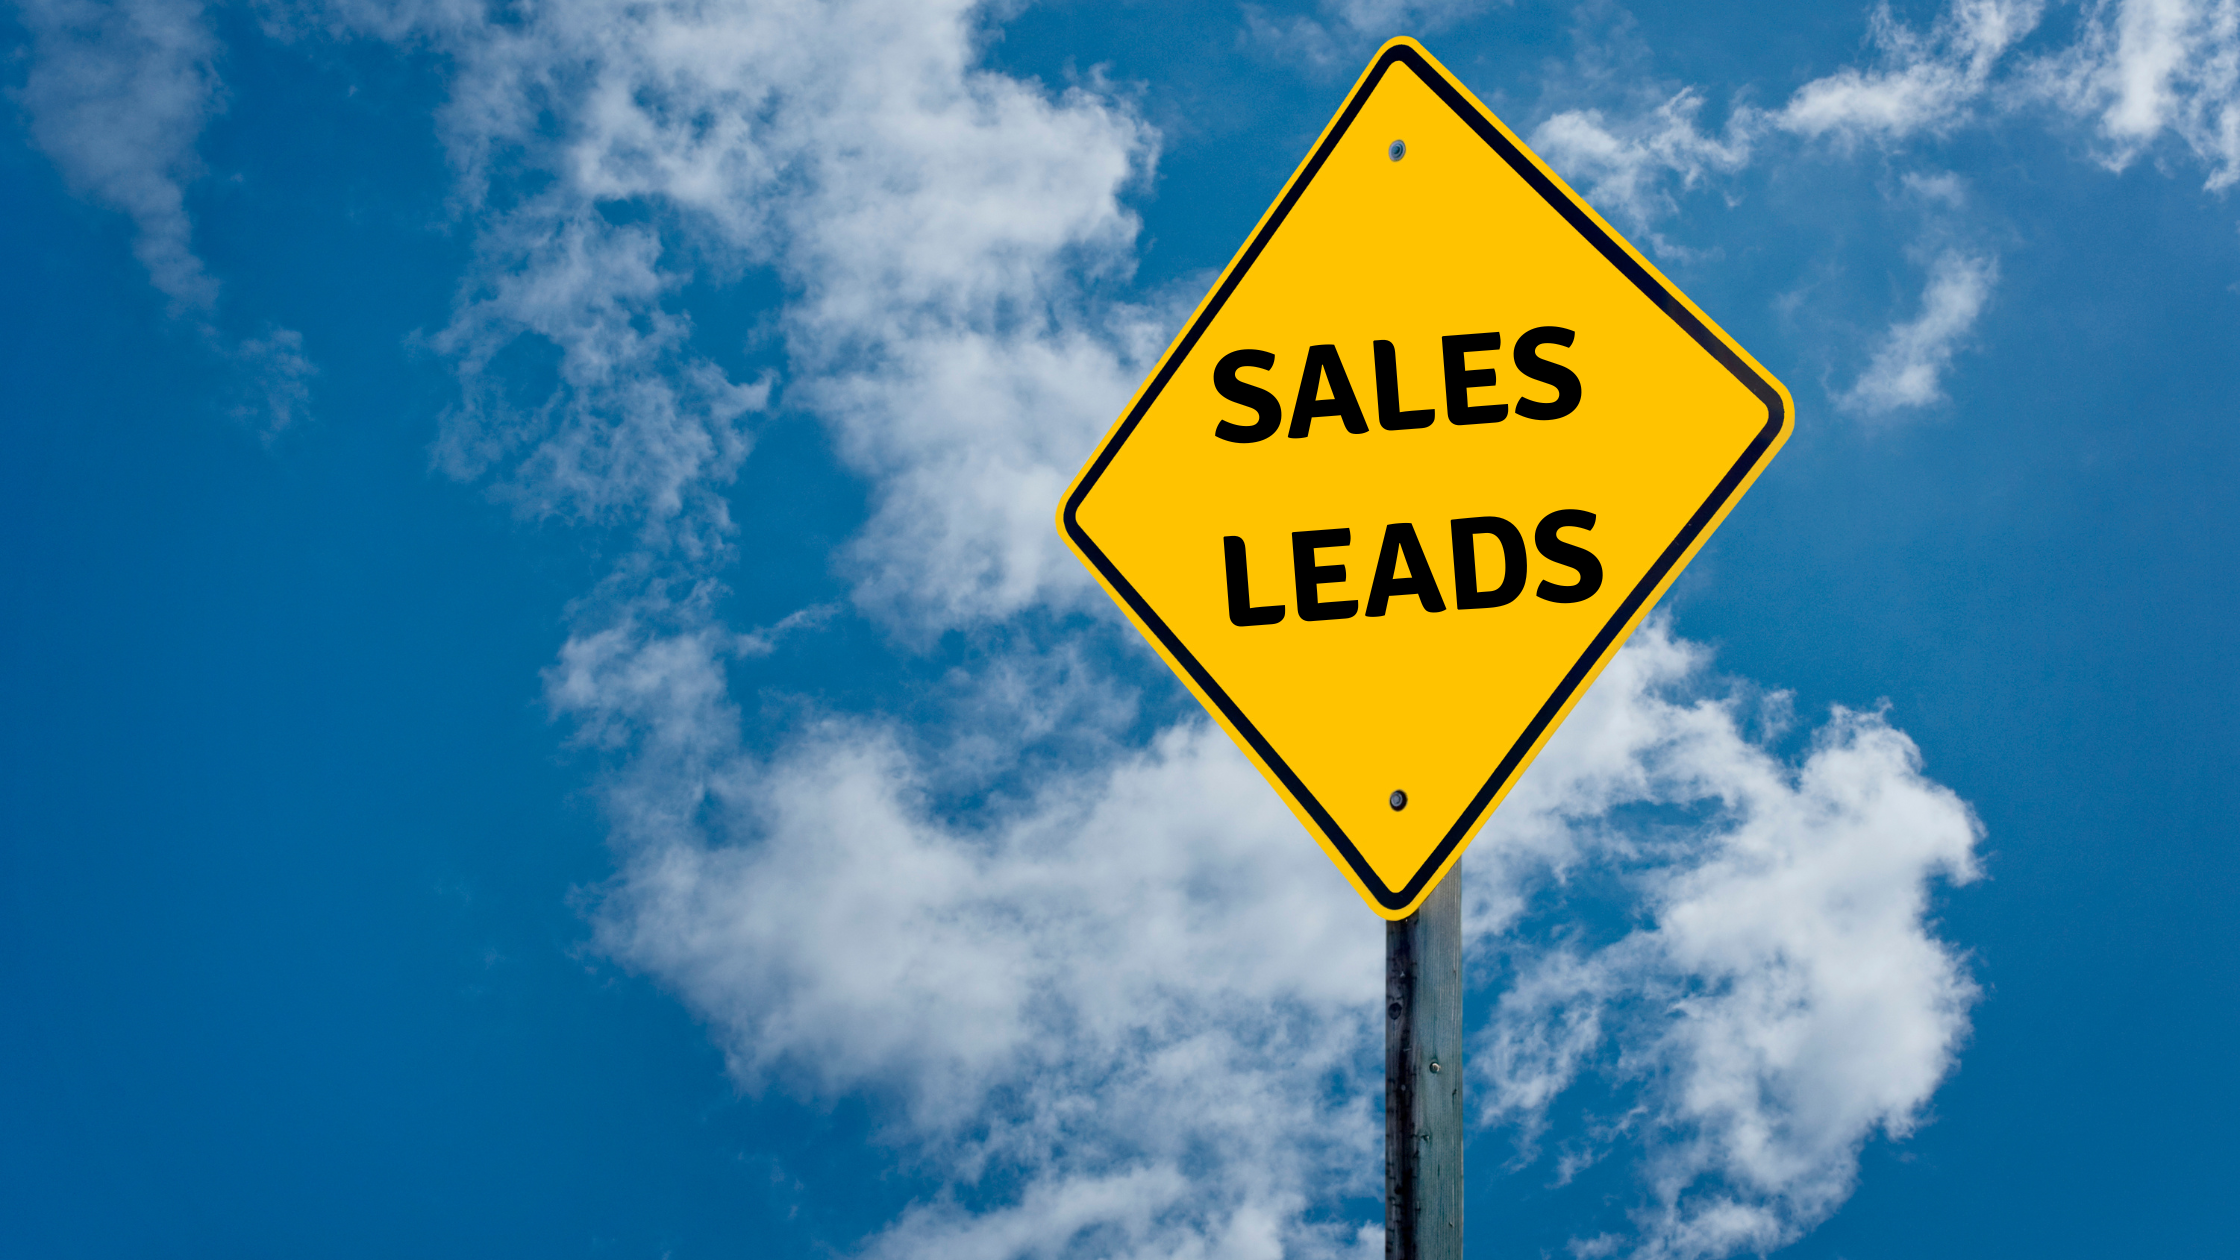 28 Tips to Improve Your Sales Lead Generation Process